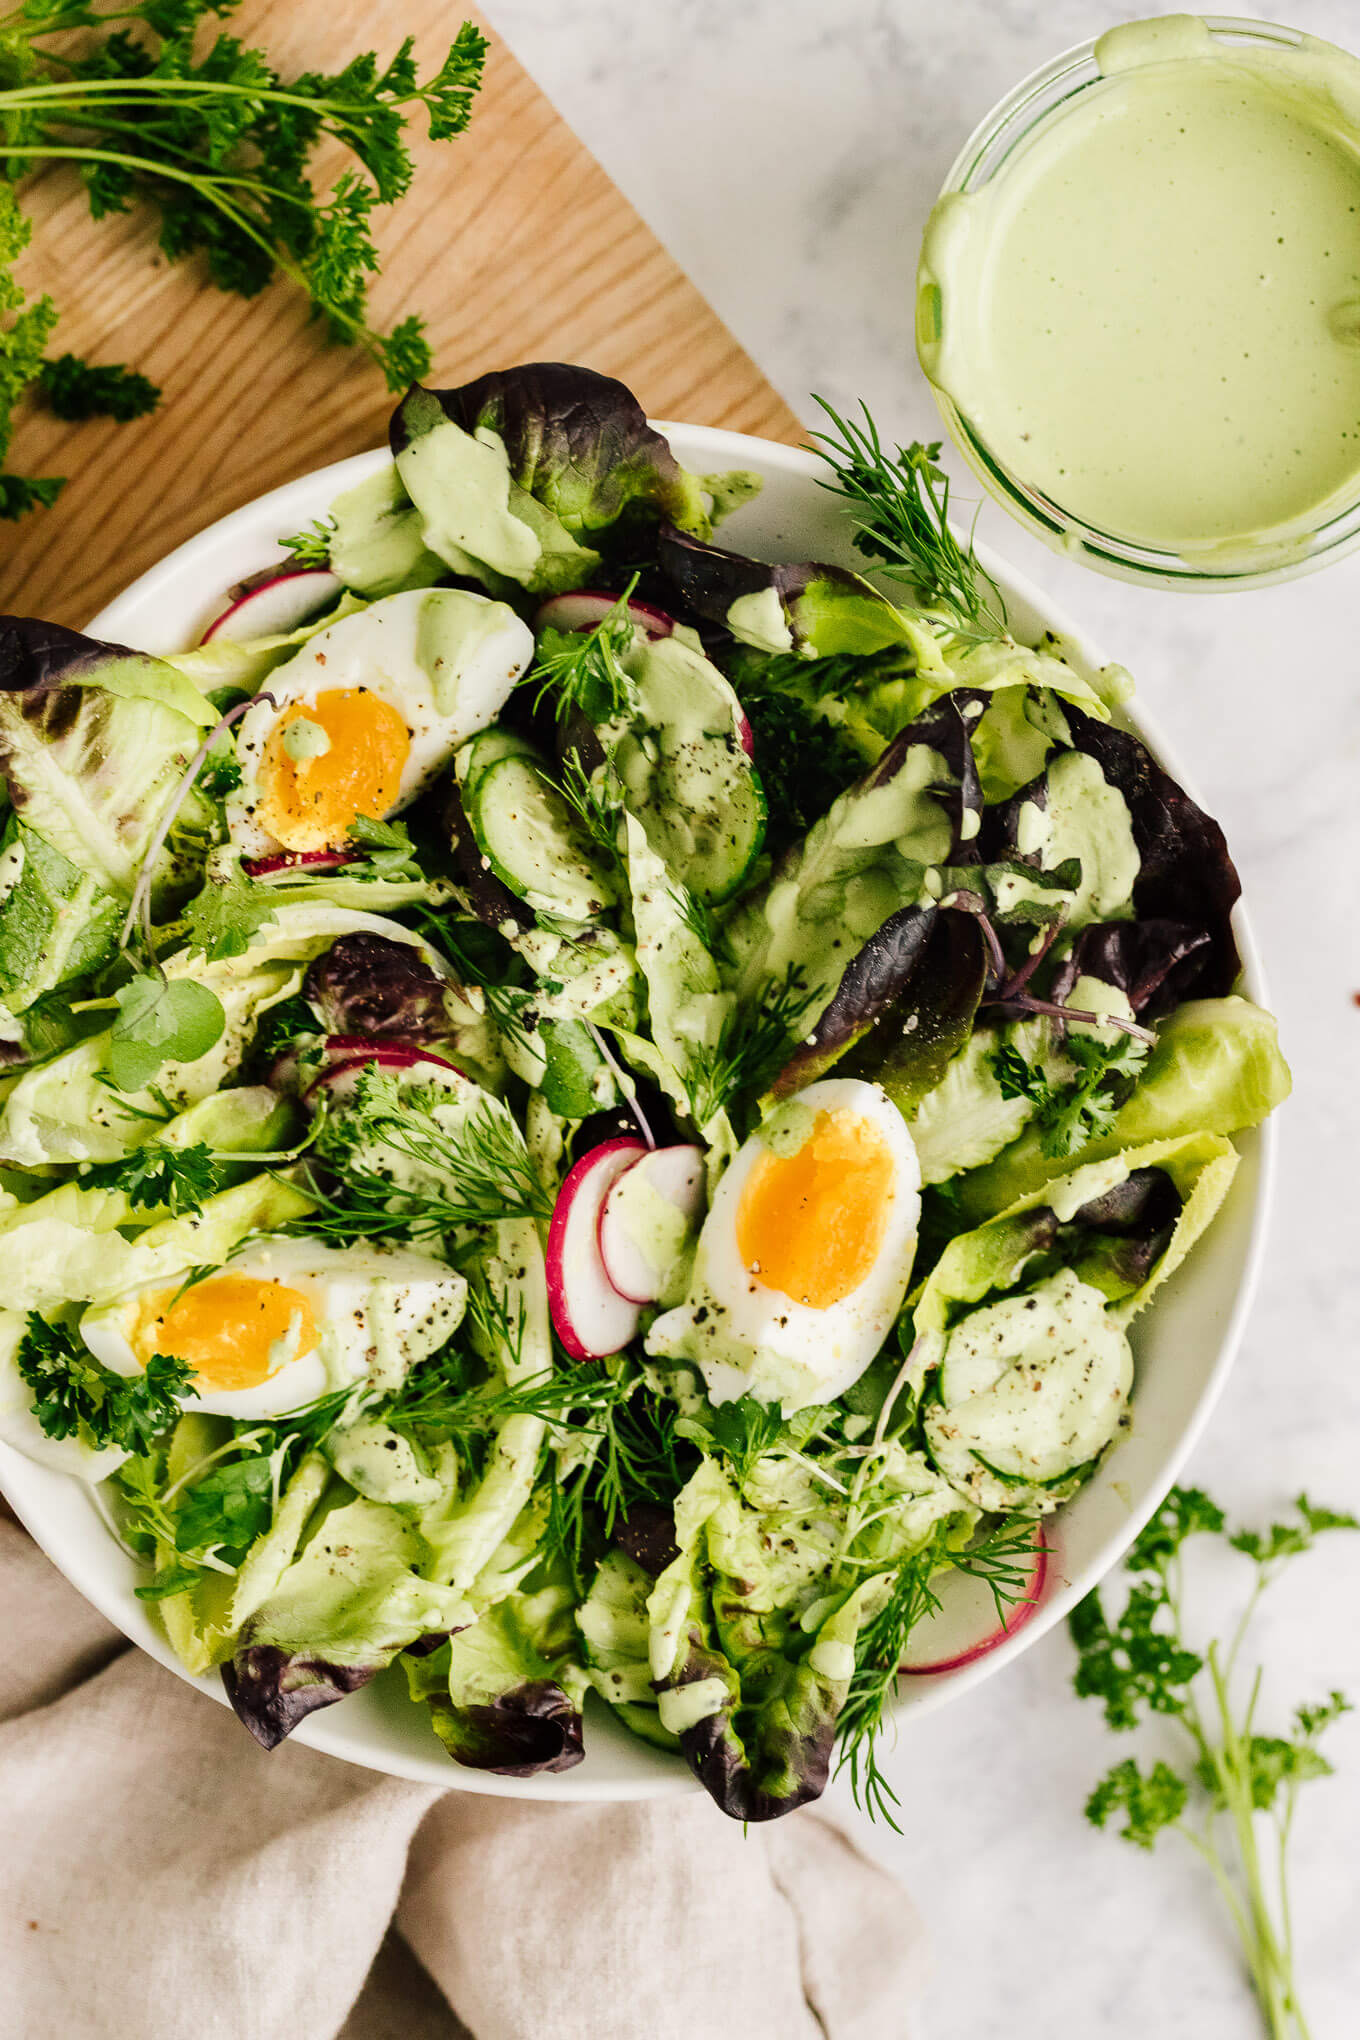 Spring salad with jammy eggs and green goddess dressing made with cashews. Dairy-free.